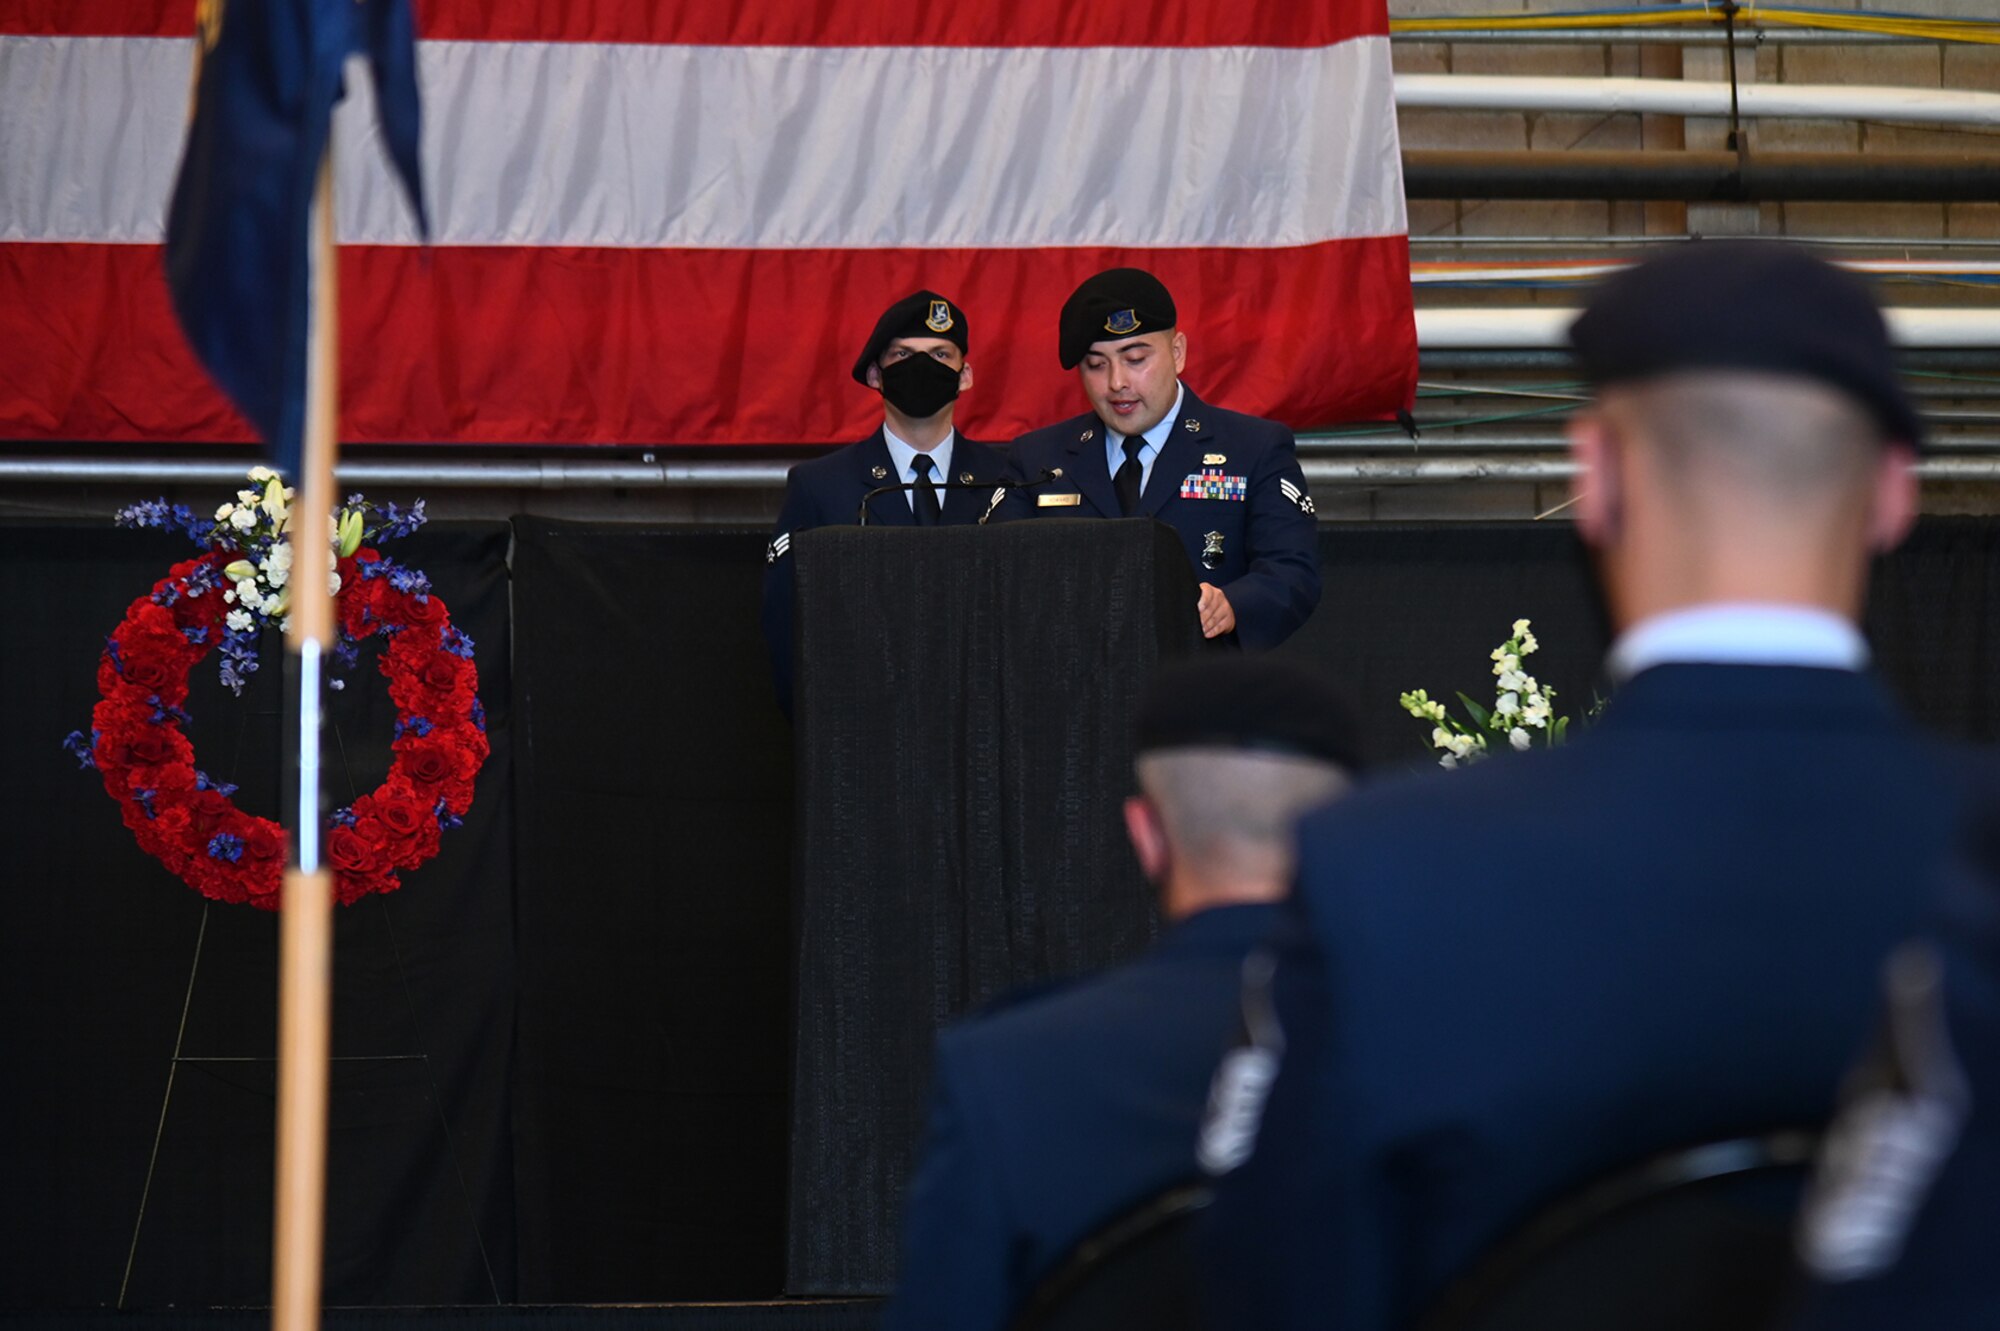 Members of the 66th Security Forces Squadron salute during Senior Airman Jason “Khai” Phan’s memorial service at Hanscom Air Force Base, Mass., Oct. 16. During the ceremony, wingmen remembered the fallen Airman, who died in a non-combat incident Sept. 12 while serving overseas. (U.S. Air Force photo by Linda LaBonte Britt)